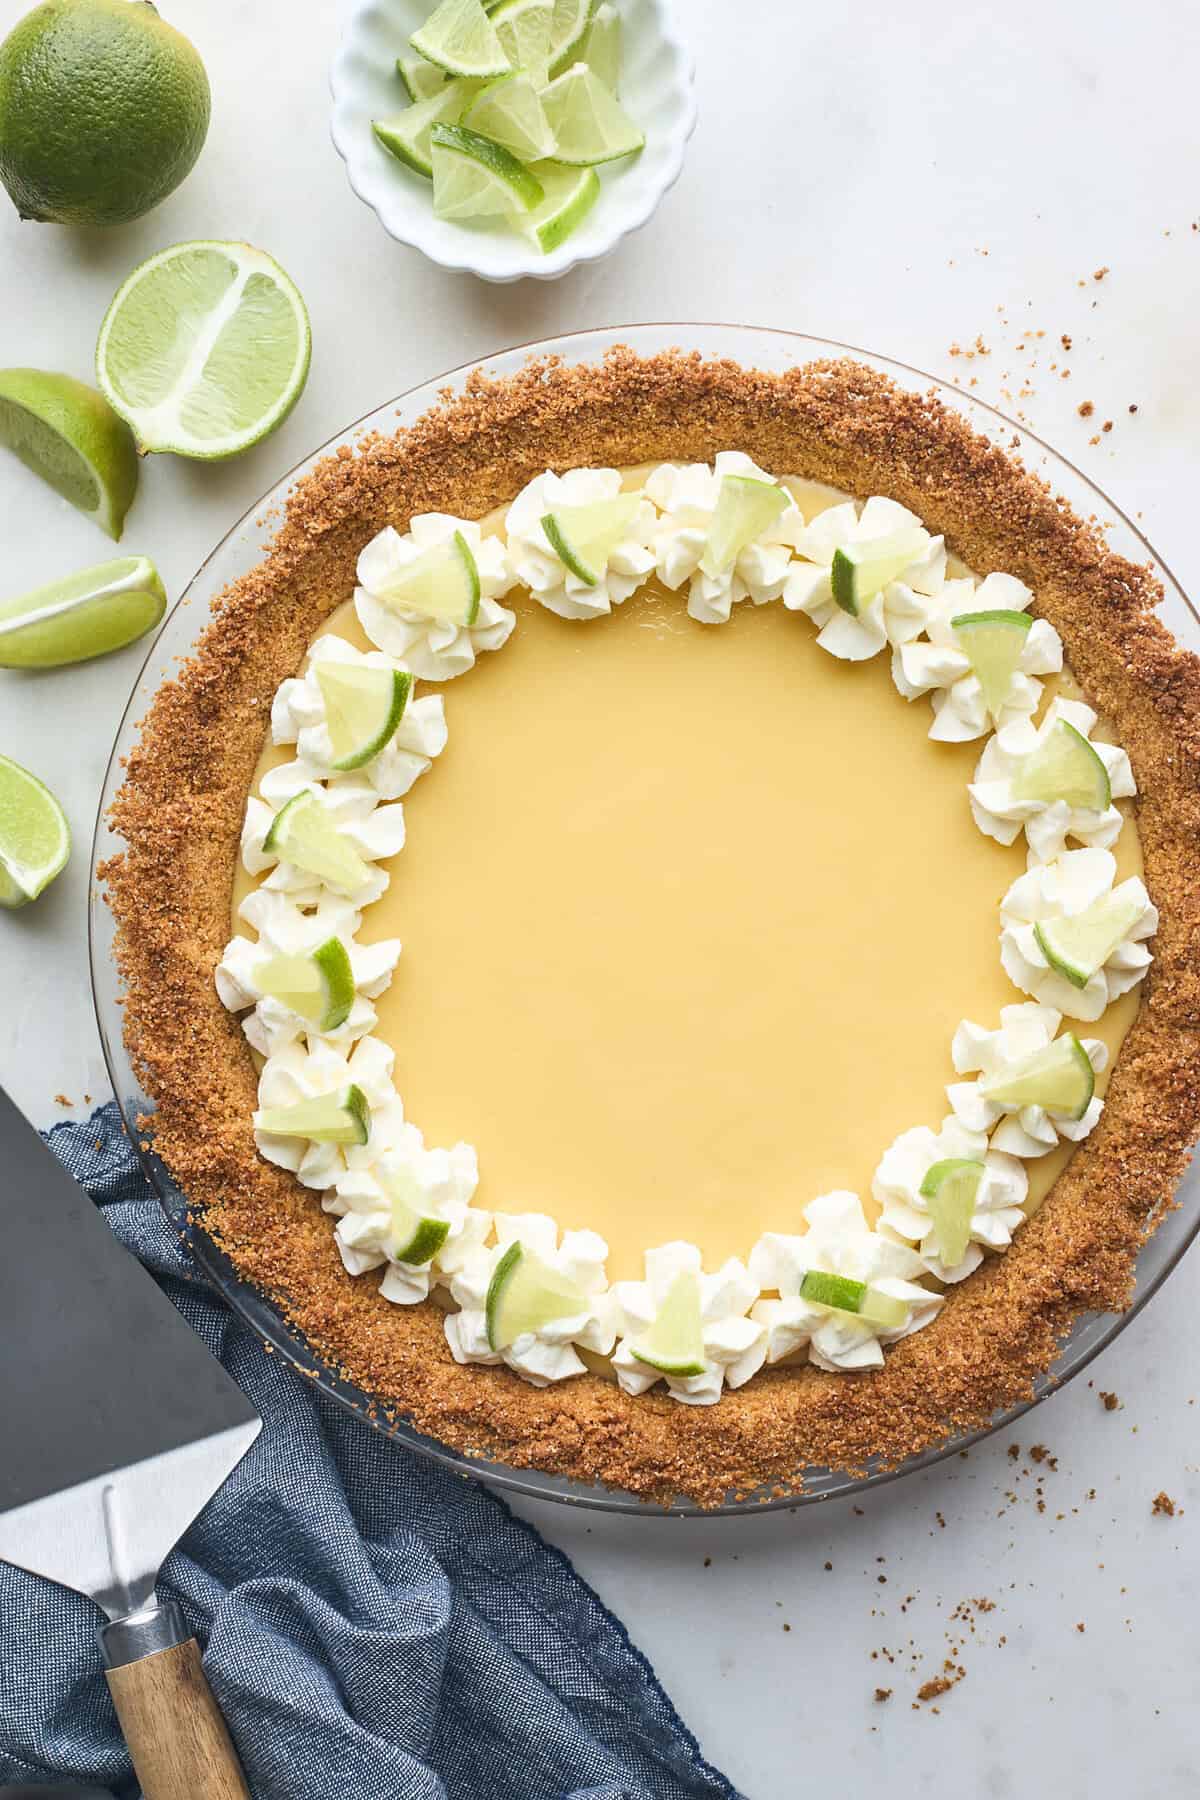 A traditional key lime pie against a gray background with key limes in the background and a spatula to serve